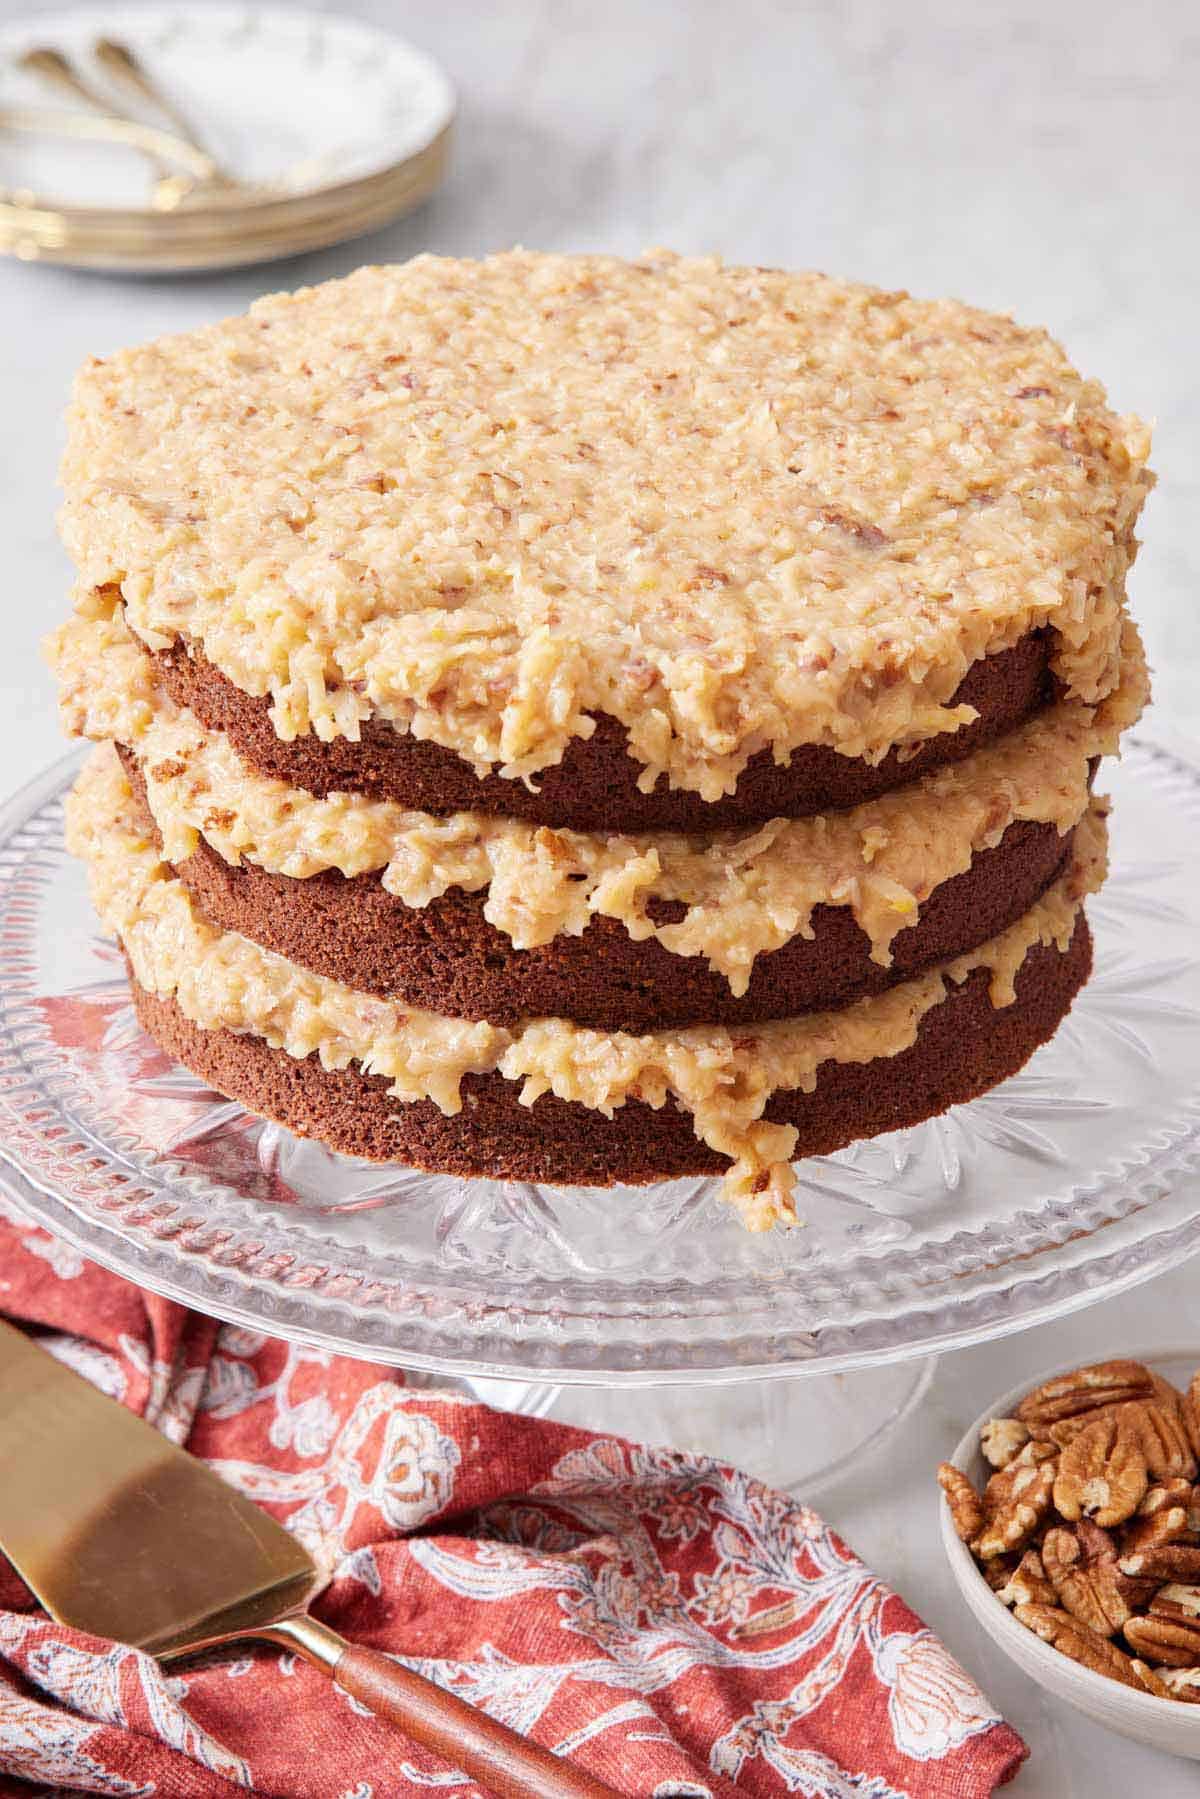 A cake stand with a German chocolate cake with three cake layers with frosting in between each layer.